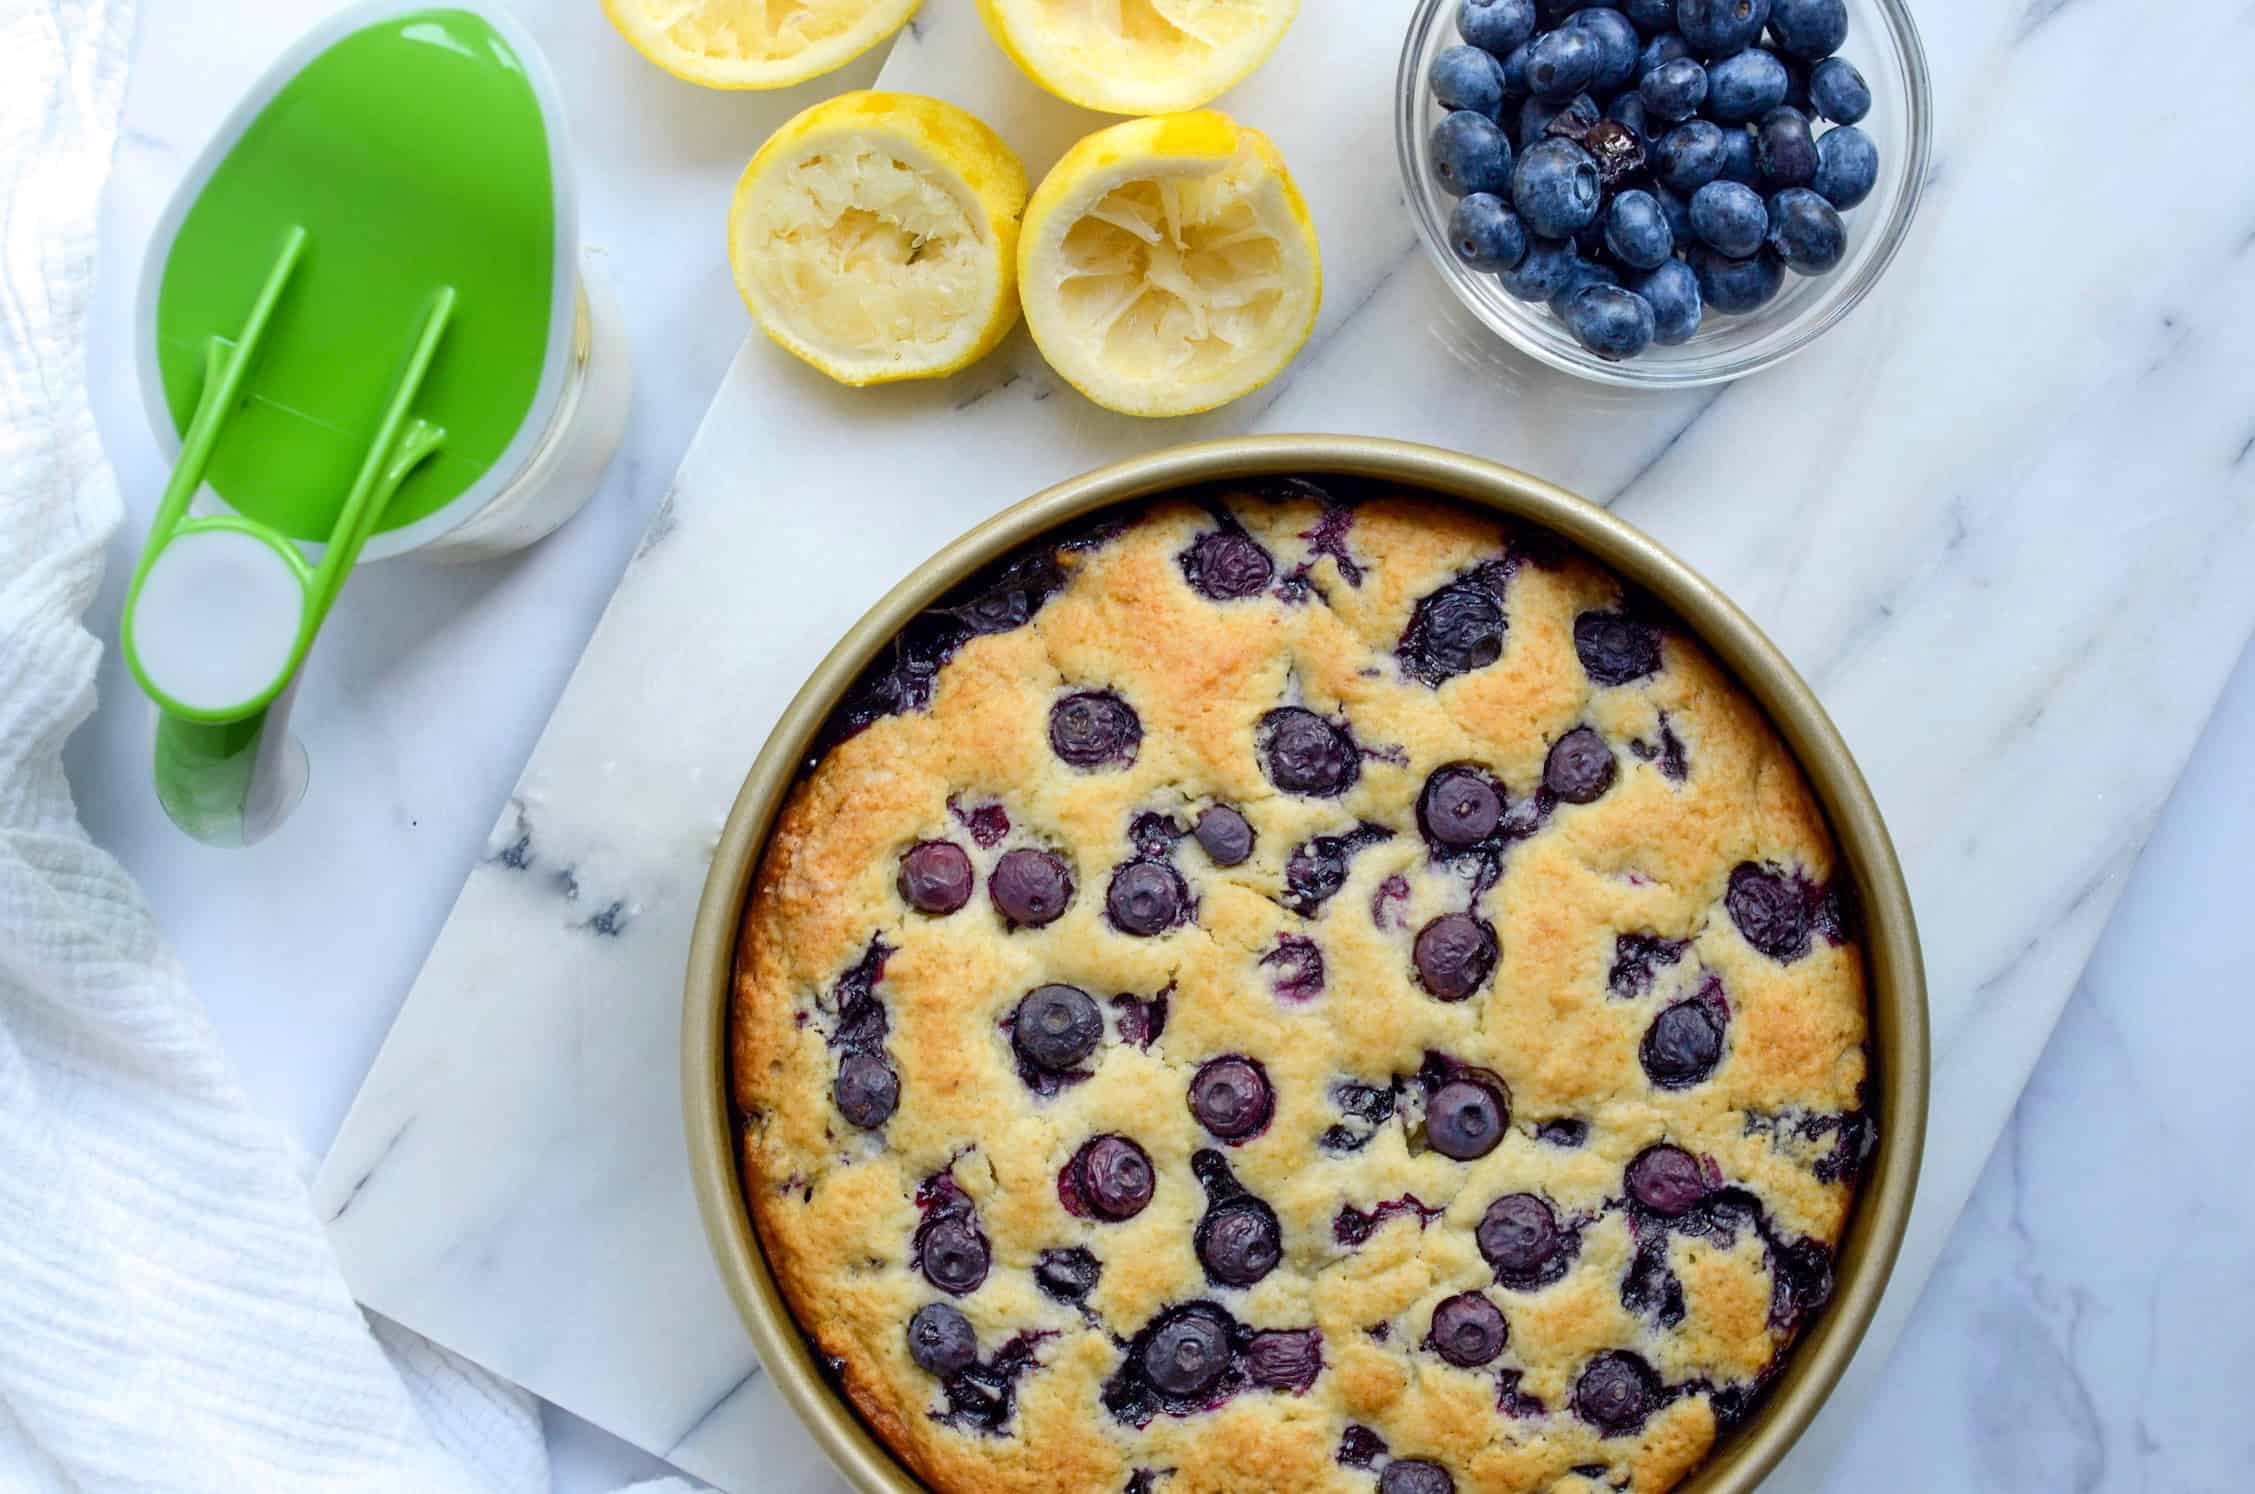 blueberry breakfast cake with lemon drizzle